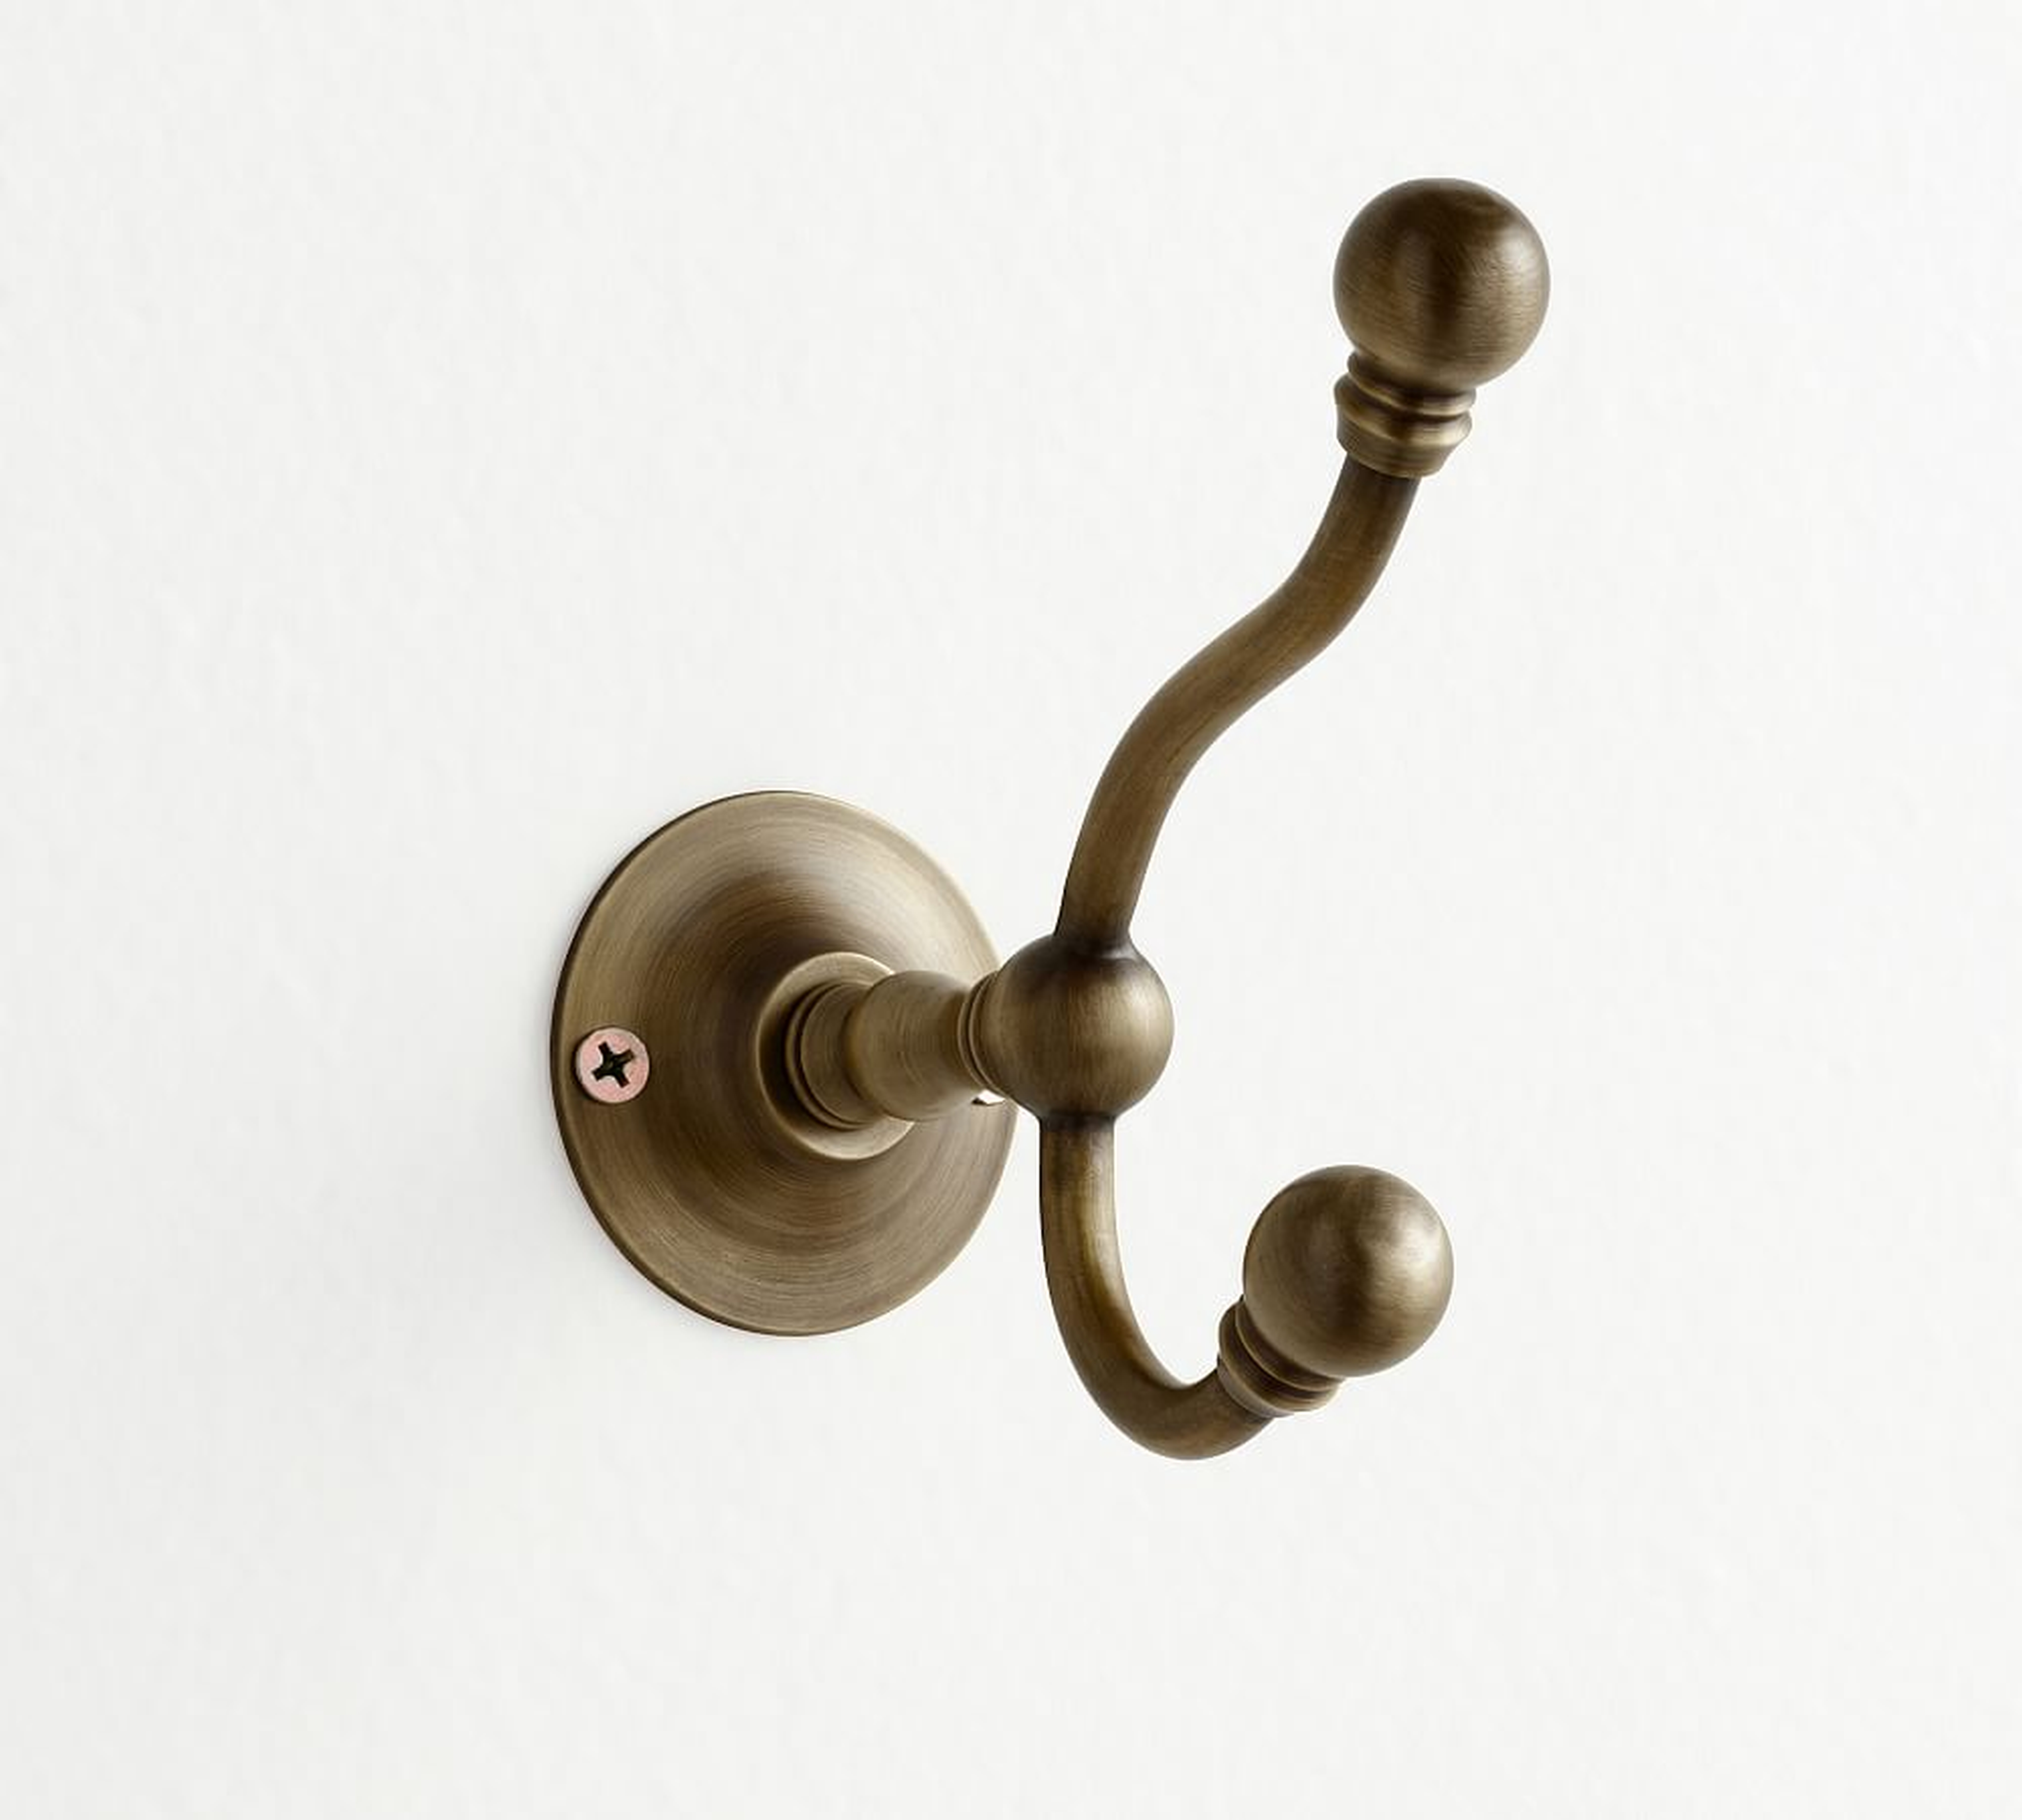 Sussex Wall Hook, Tumbled Brass - Pottery Barn